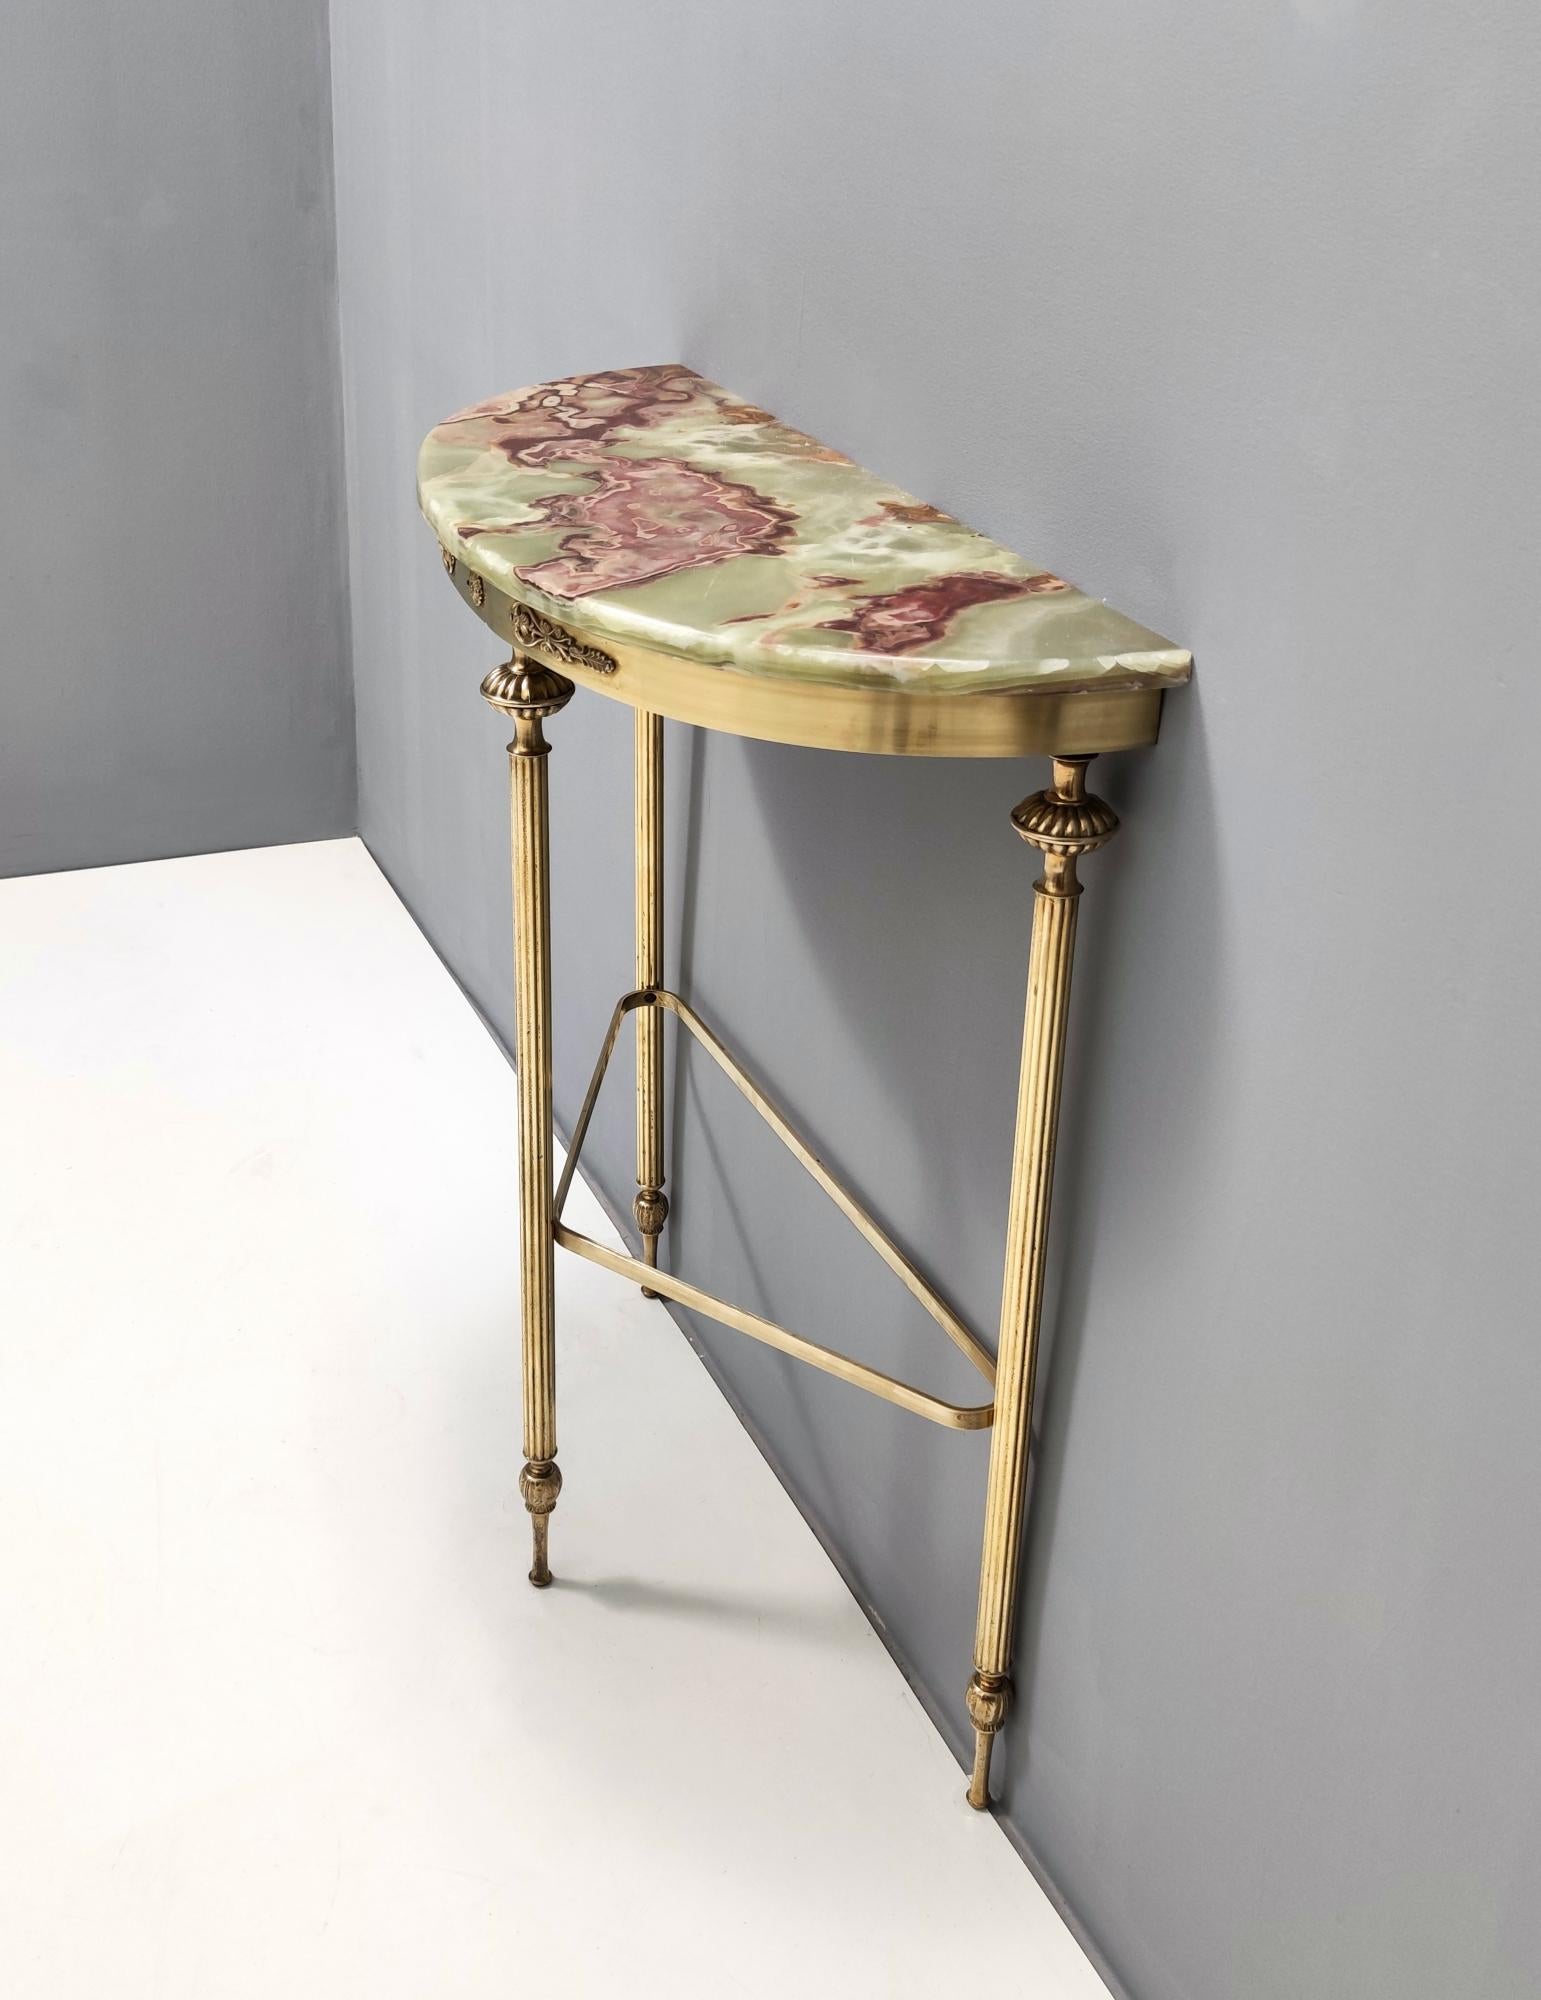 Cast Midcentury Brass Console Table with a Demilune Red Veined Veined Onyx Top, Italy